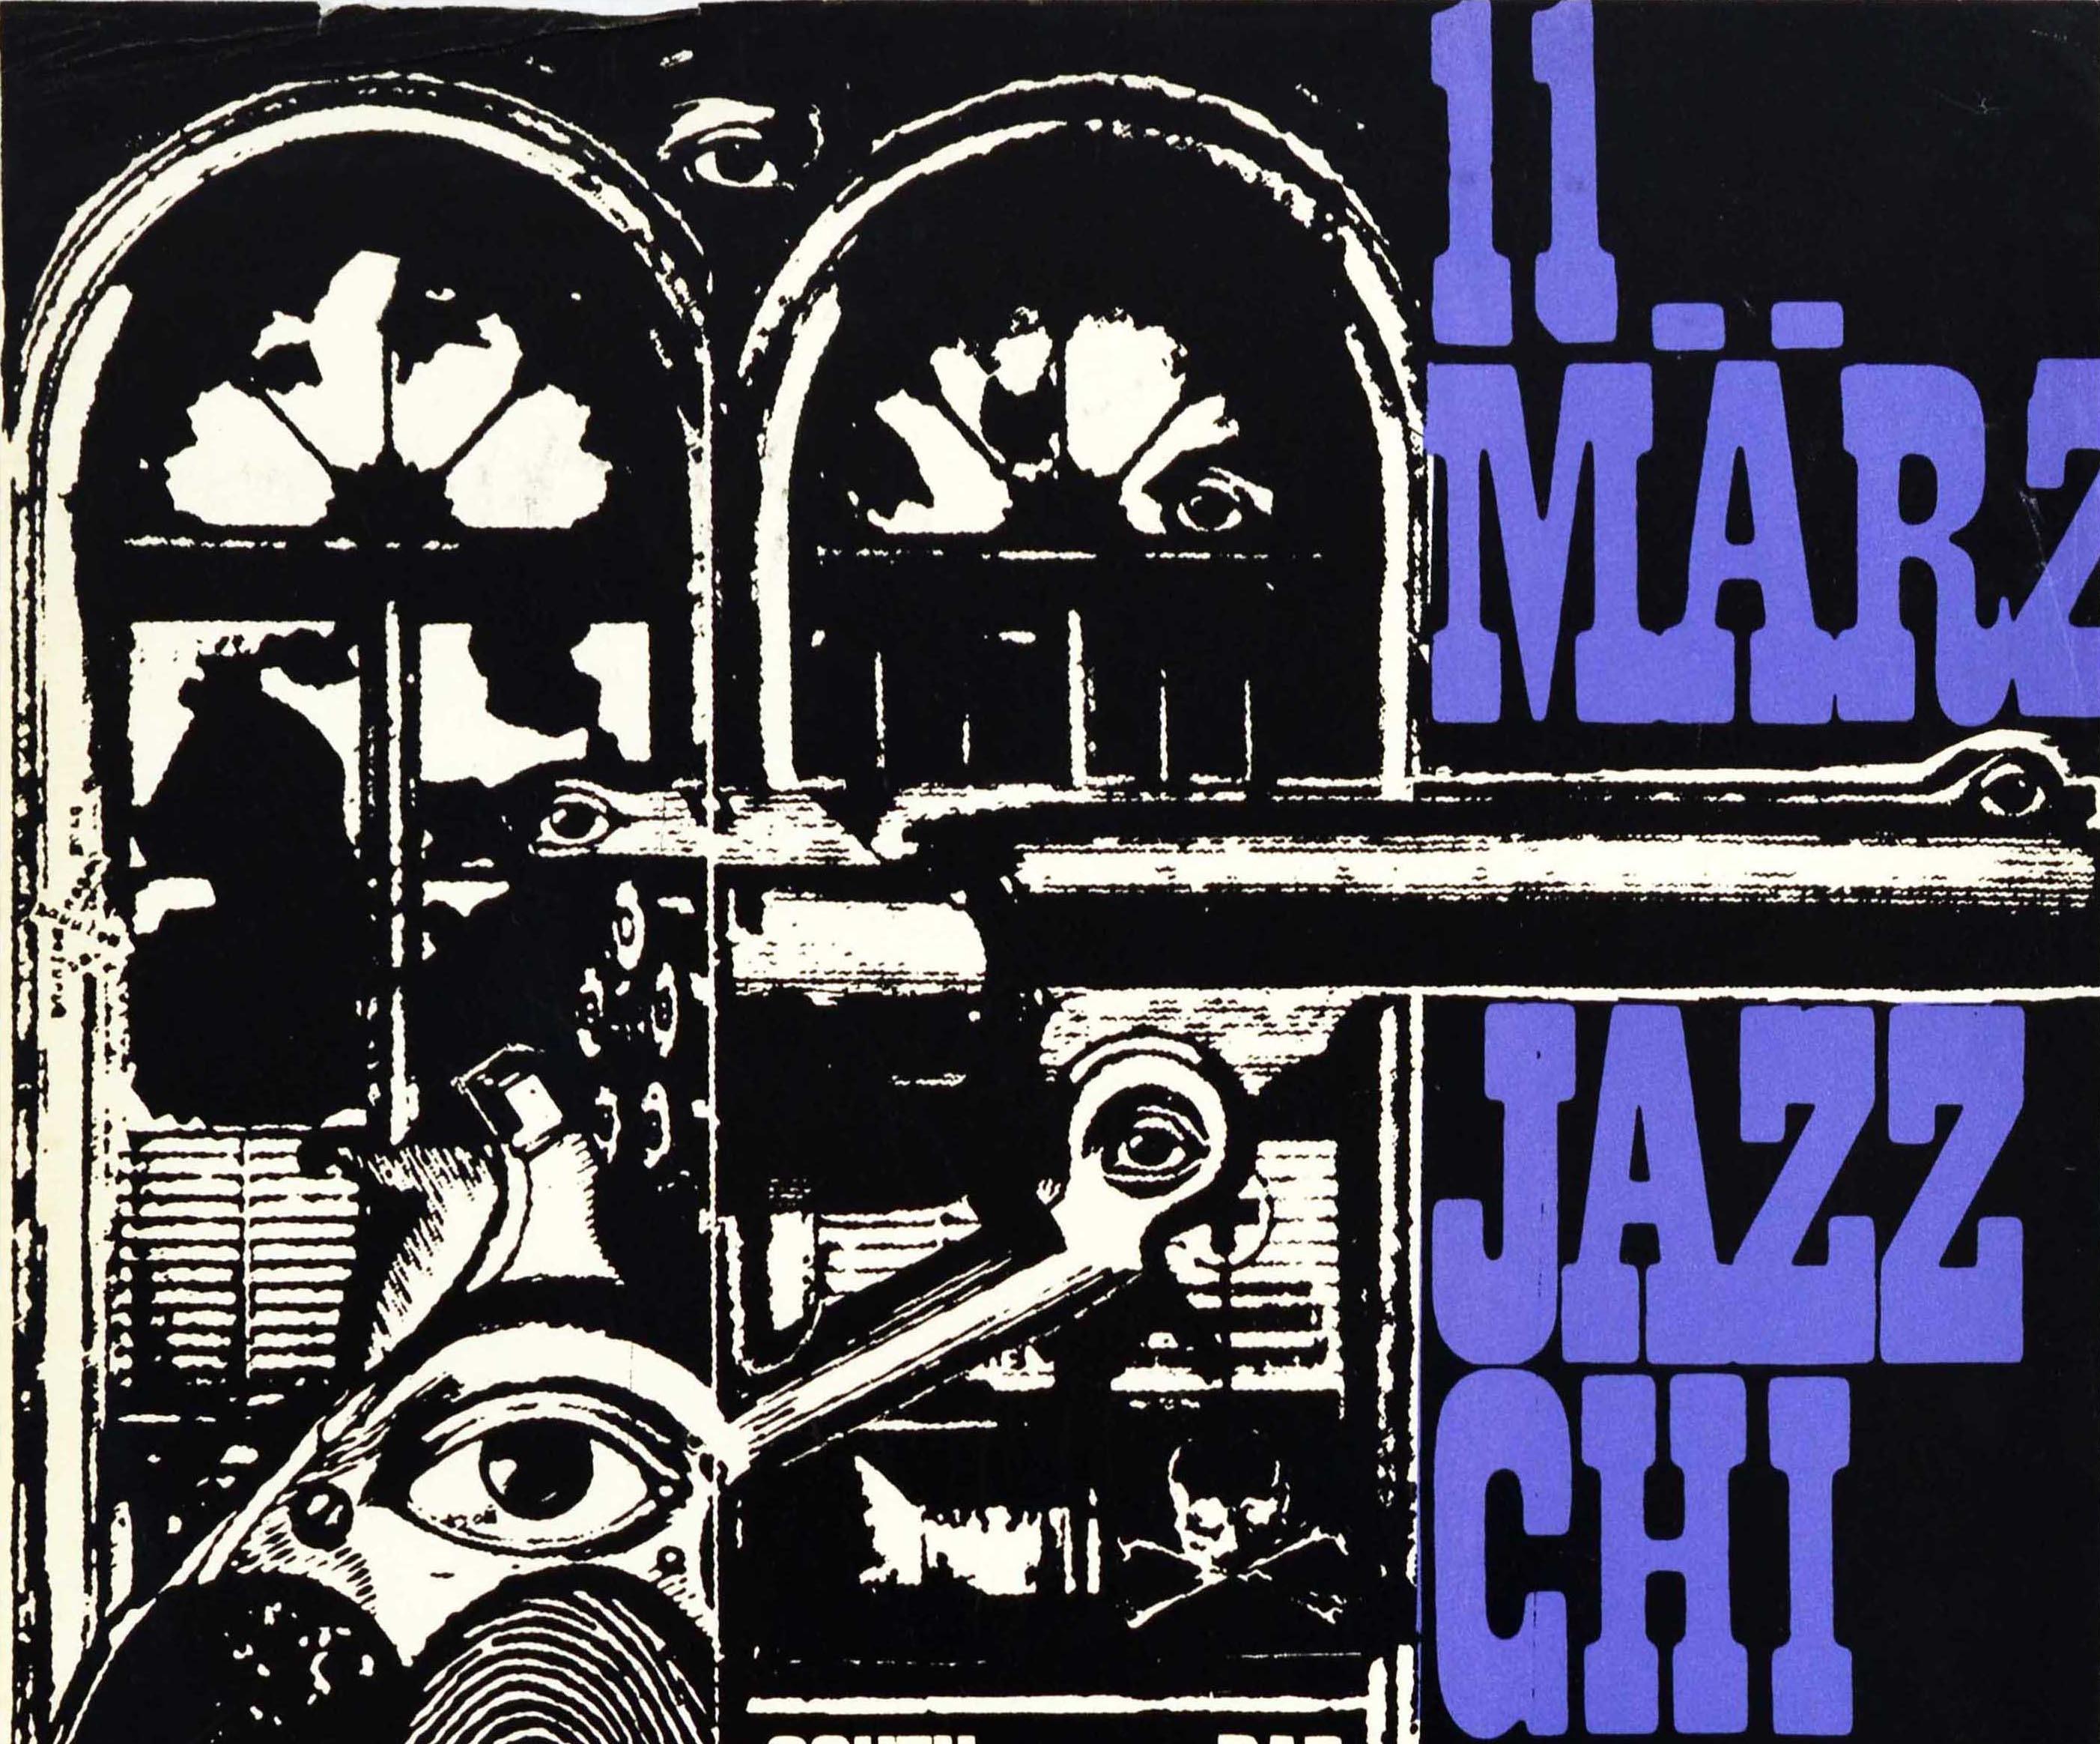 Original vintage music advertising poster for Jazz Chicago Seven at the South Border Jazz Club Bad Honnef on 11 March featuring a black and white abstract design with the bold title text down the side and in the image. Opened in 1968 in Bad Honnef